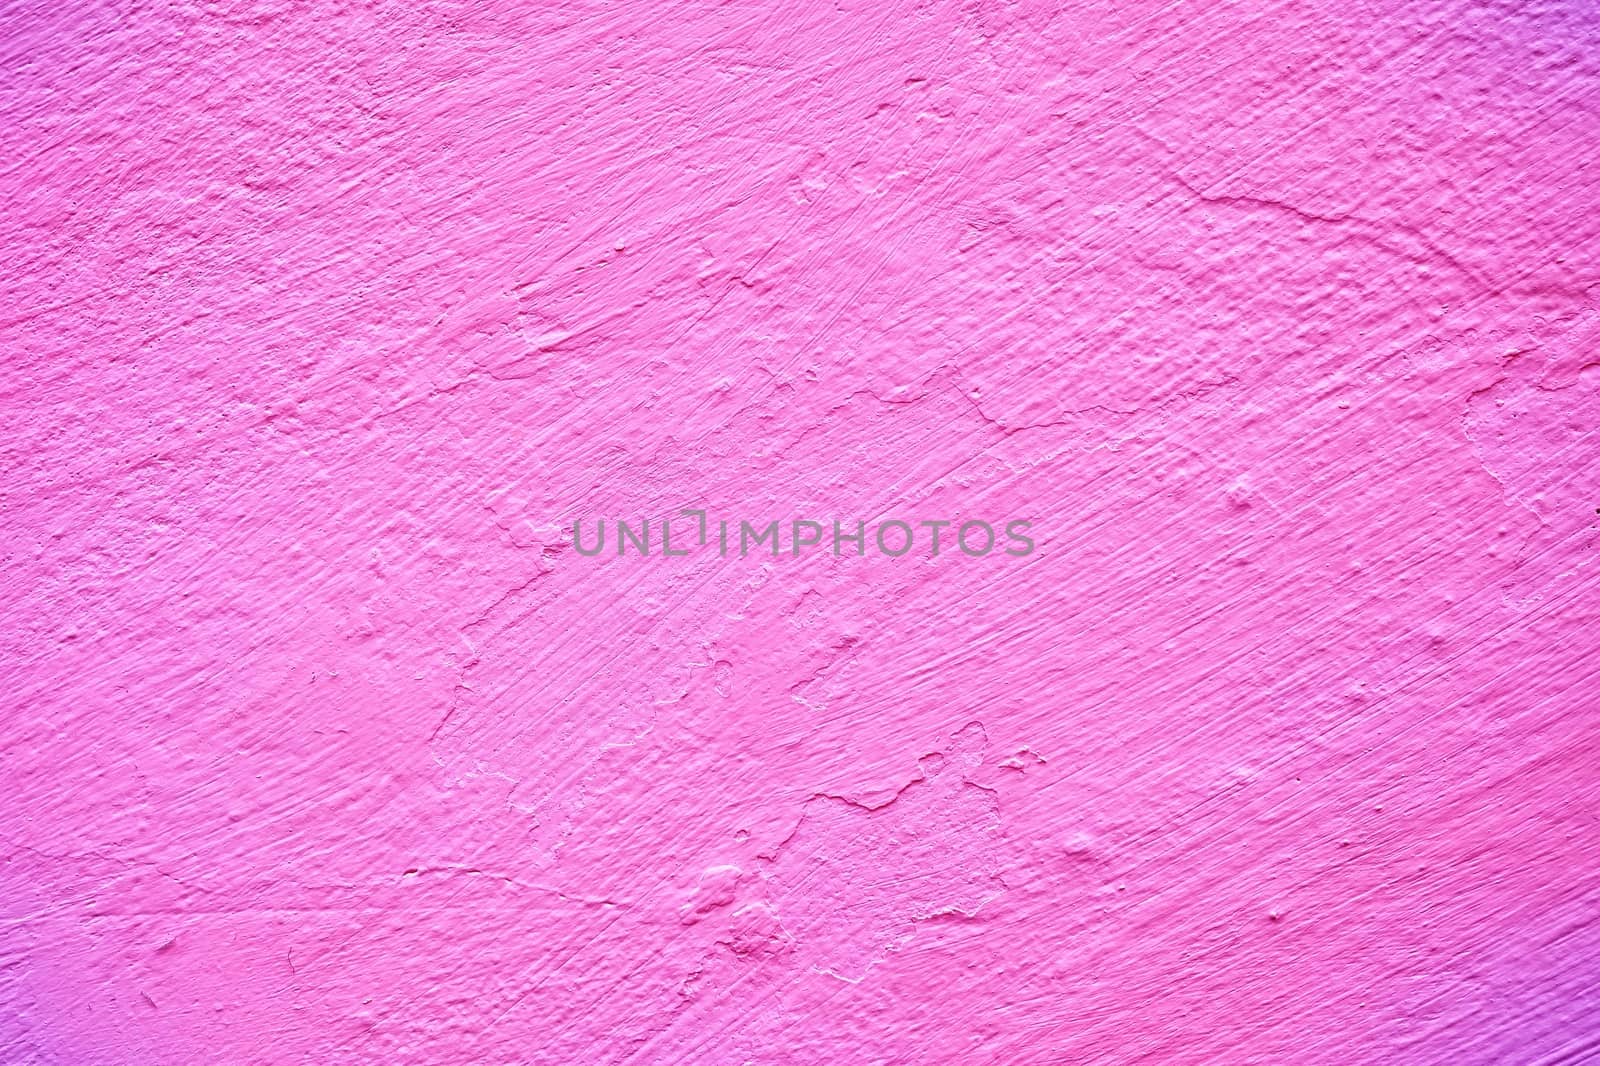 Pink Painting on Concrete Background. by mesamong